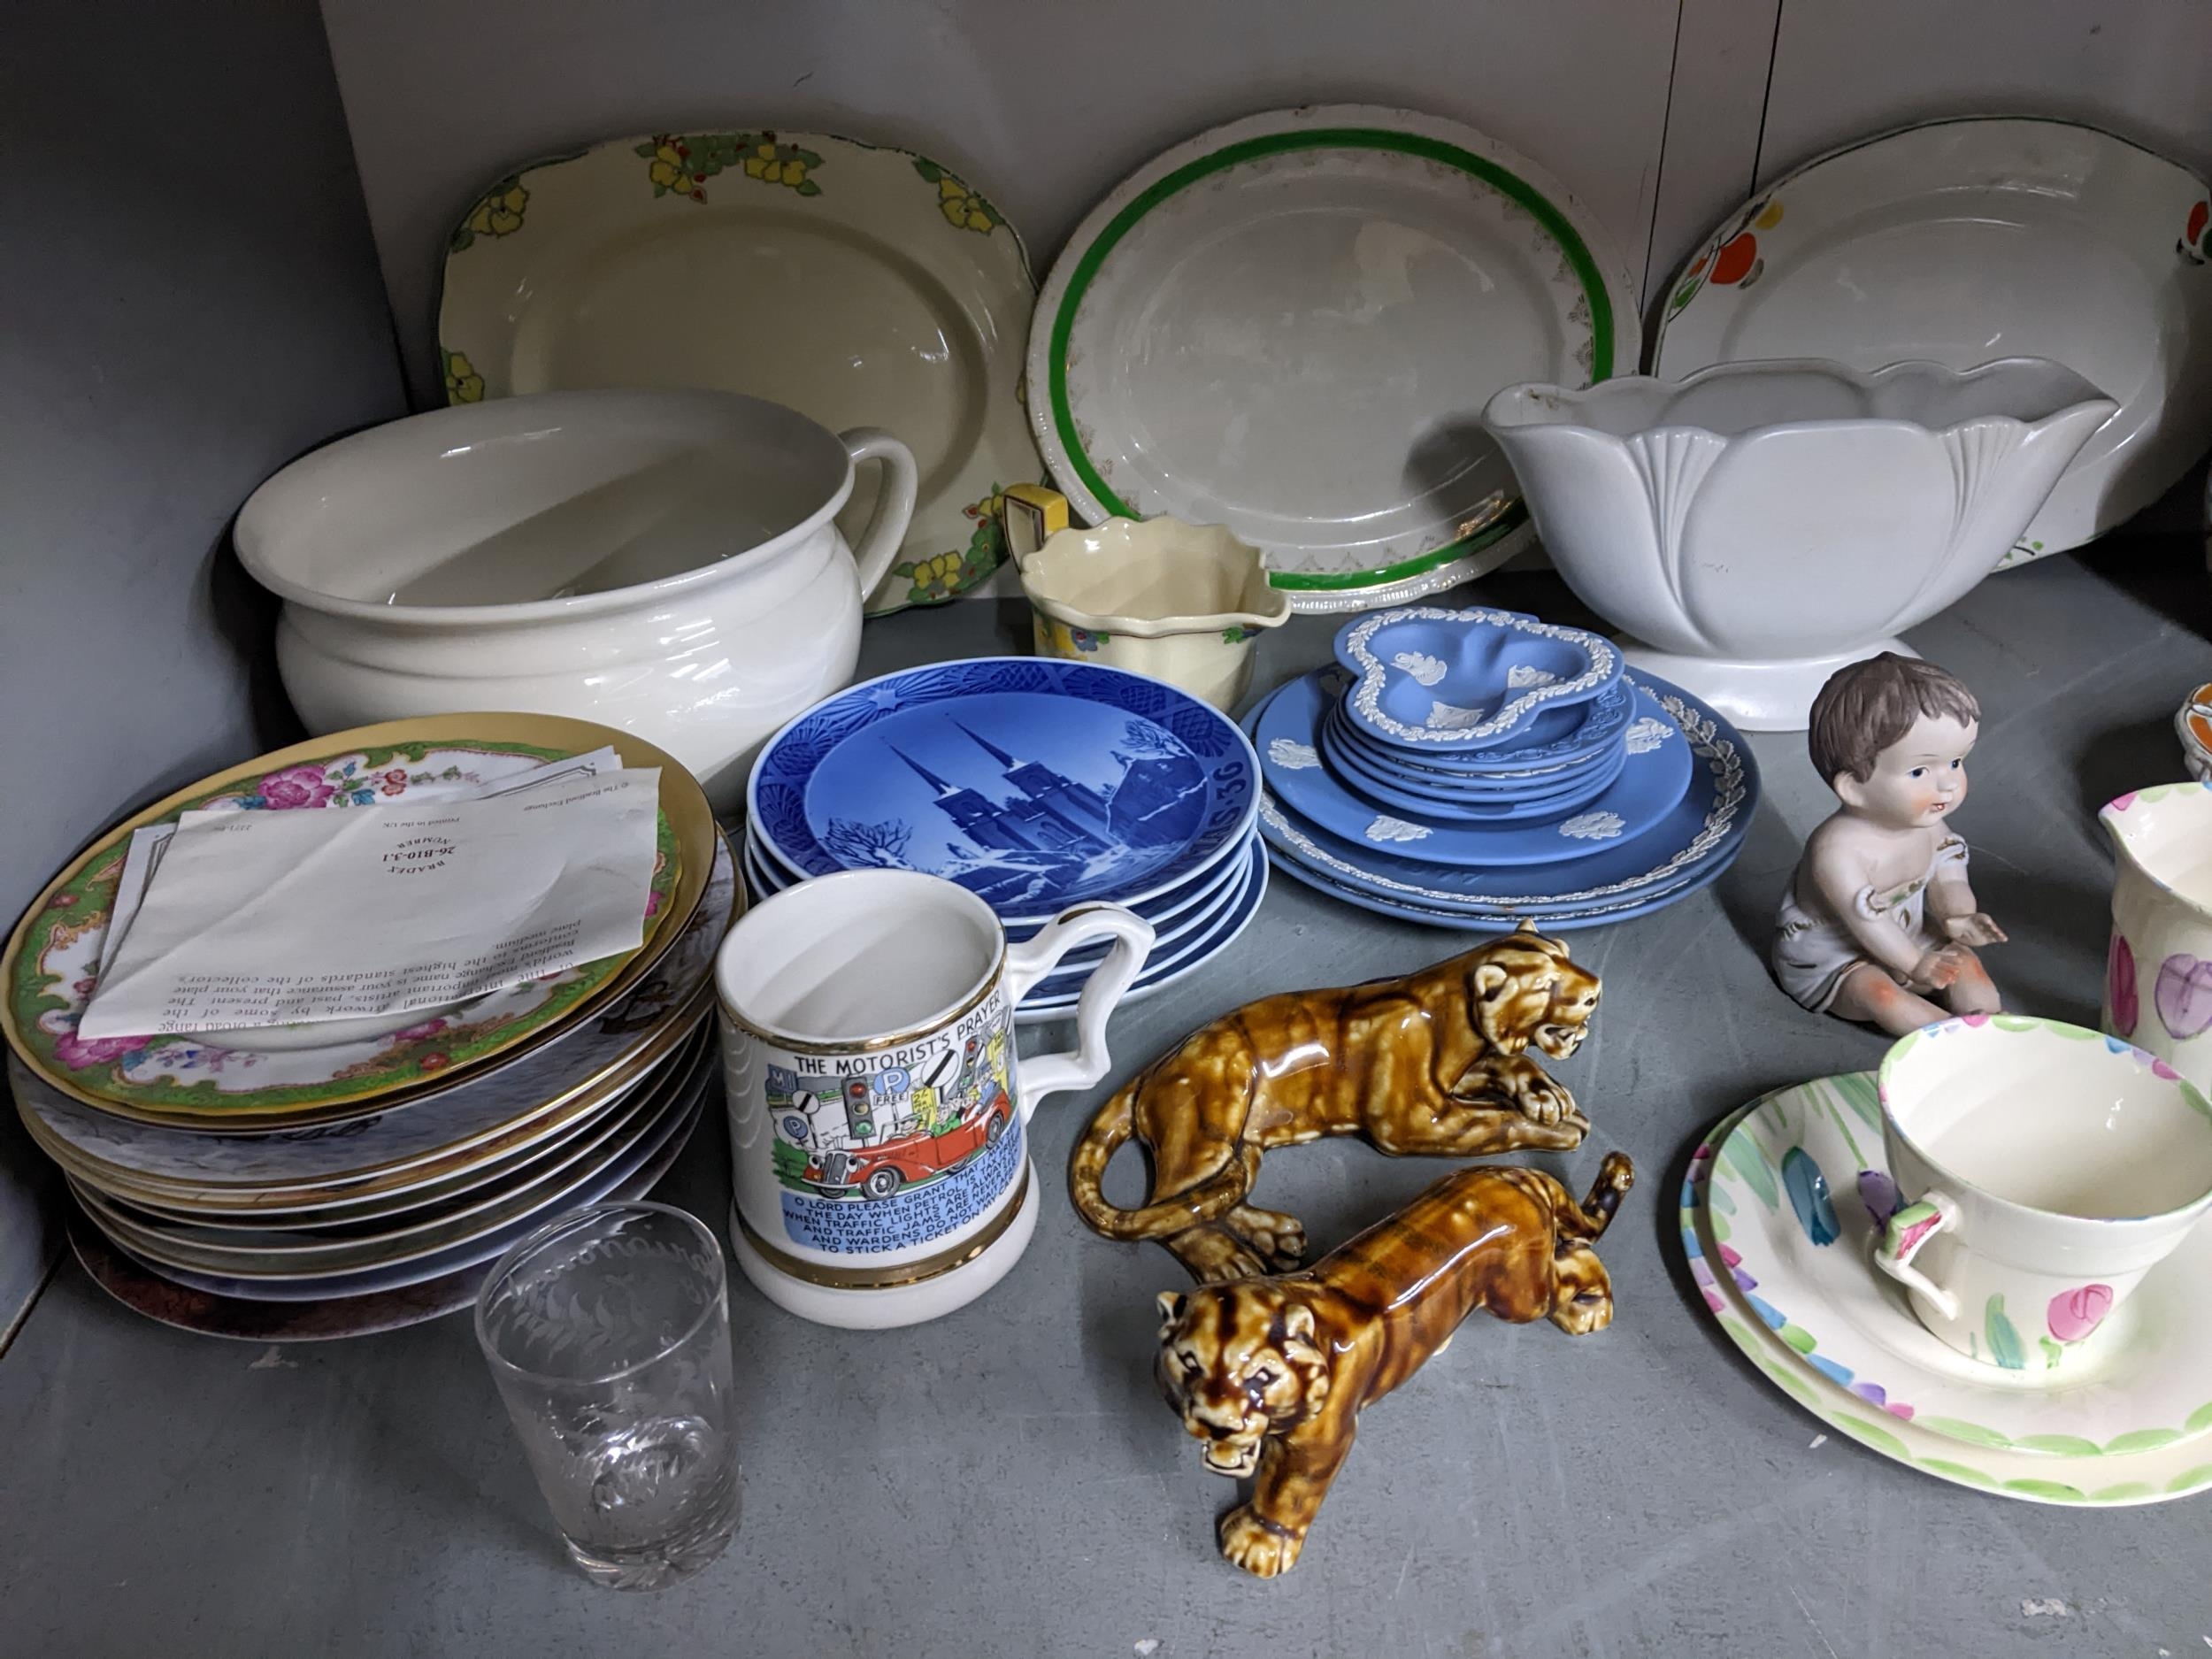 A mixed lot of ceramics, glassware and other items to include Wedgwood Jasper ware, piano babies, - Image 4 of 5